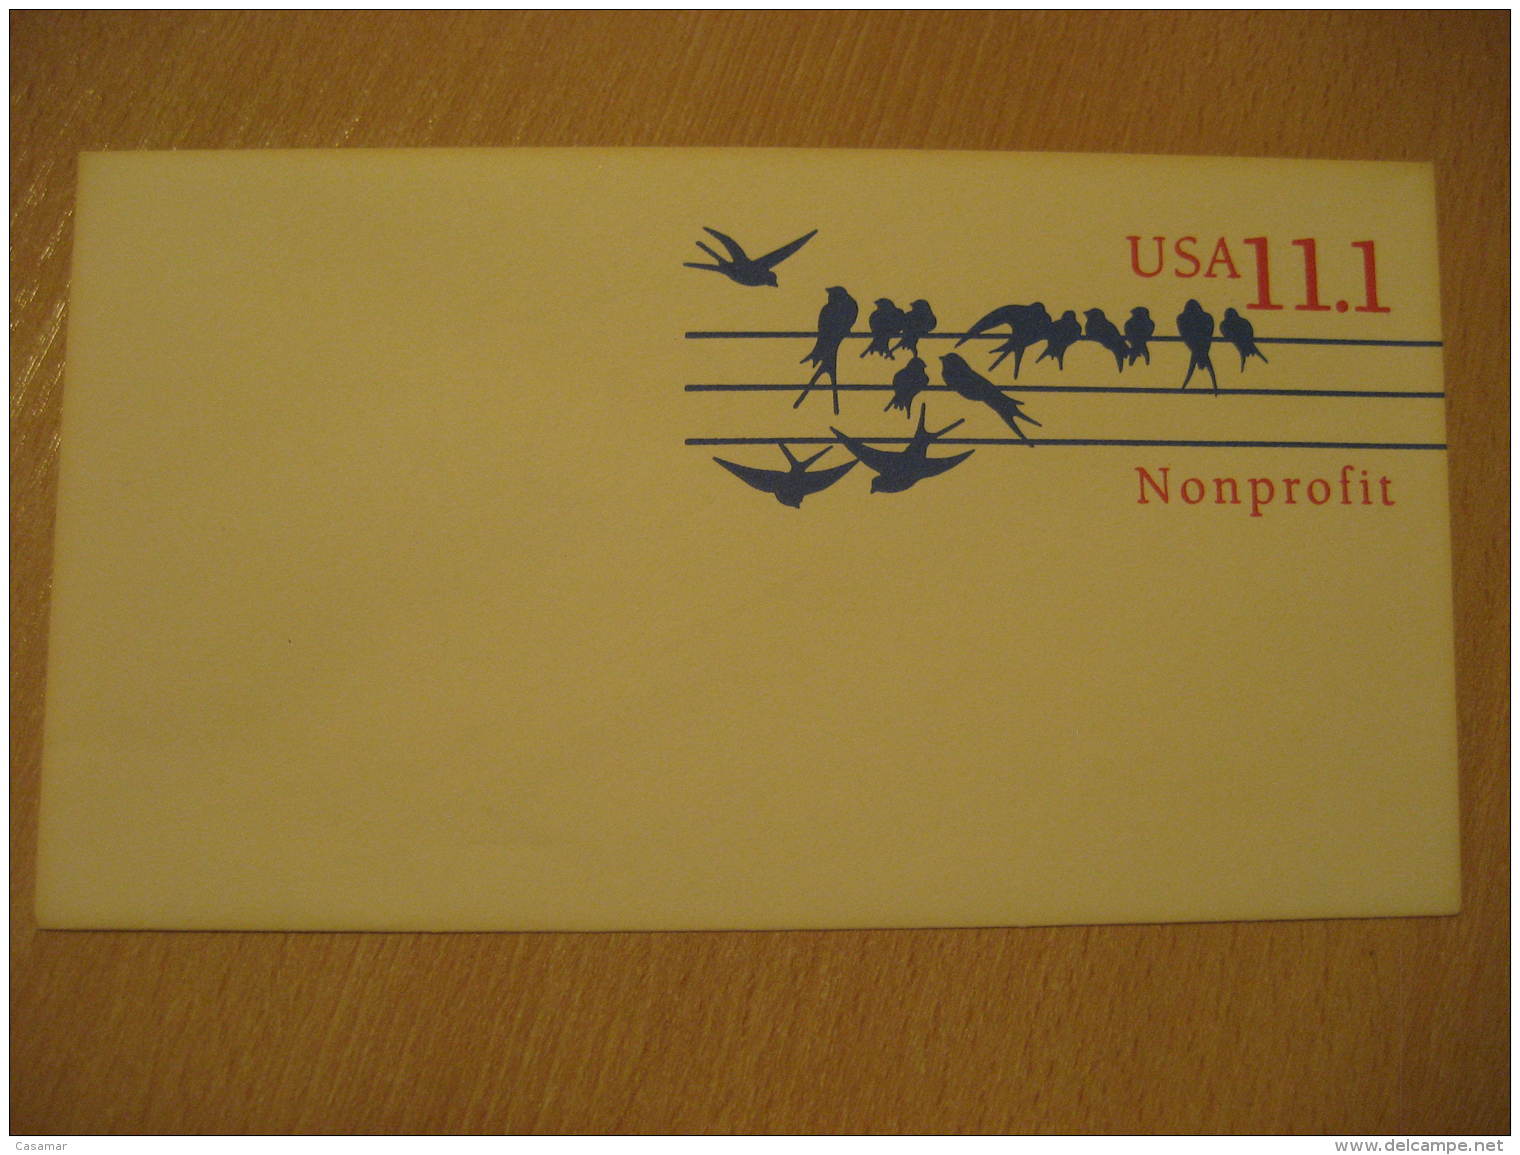 SWALLOW HIRONDELLE GOLONDRINA Swallows Postal Stationery Cover USA - Hirondelles